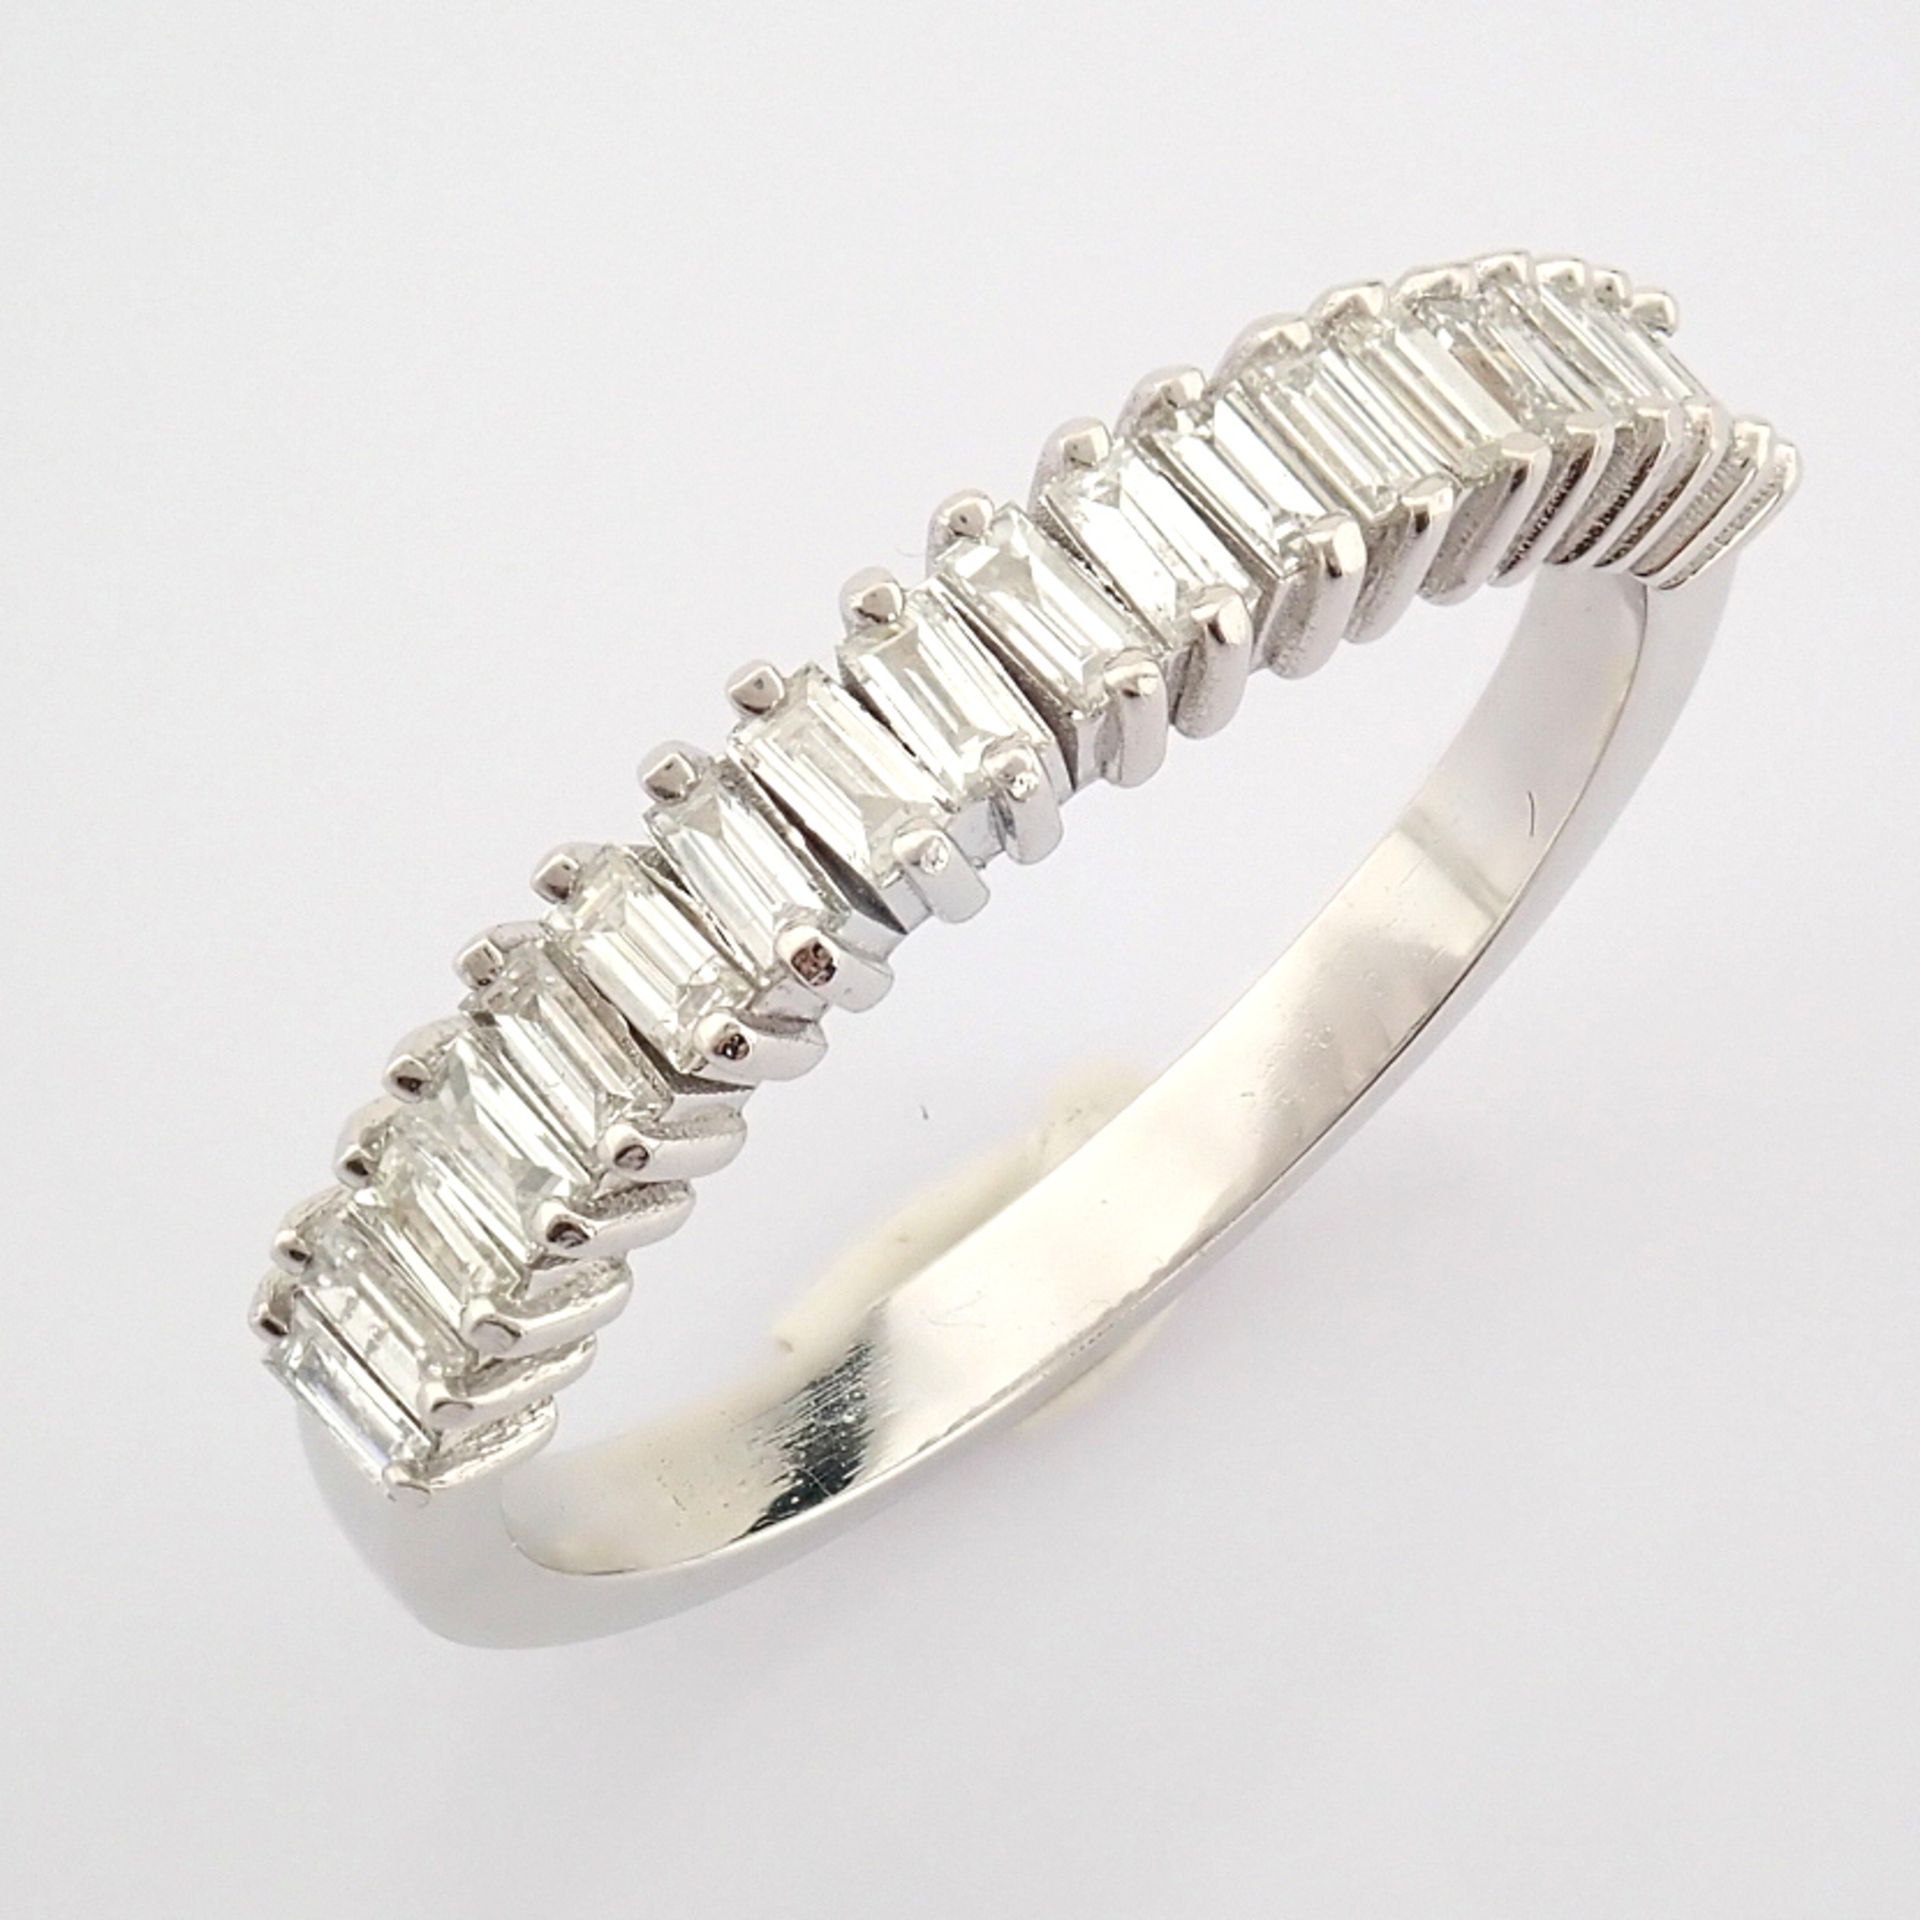 Certificated 14K White Gold Baguette Diamond Ring (Total 0.43 ct Stone) - Image 3 of 8